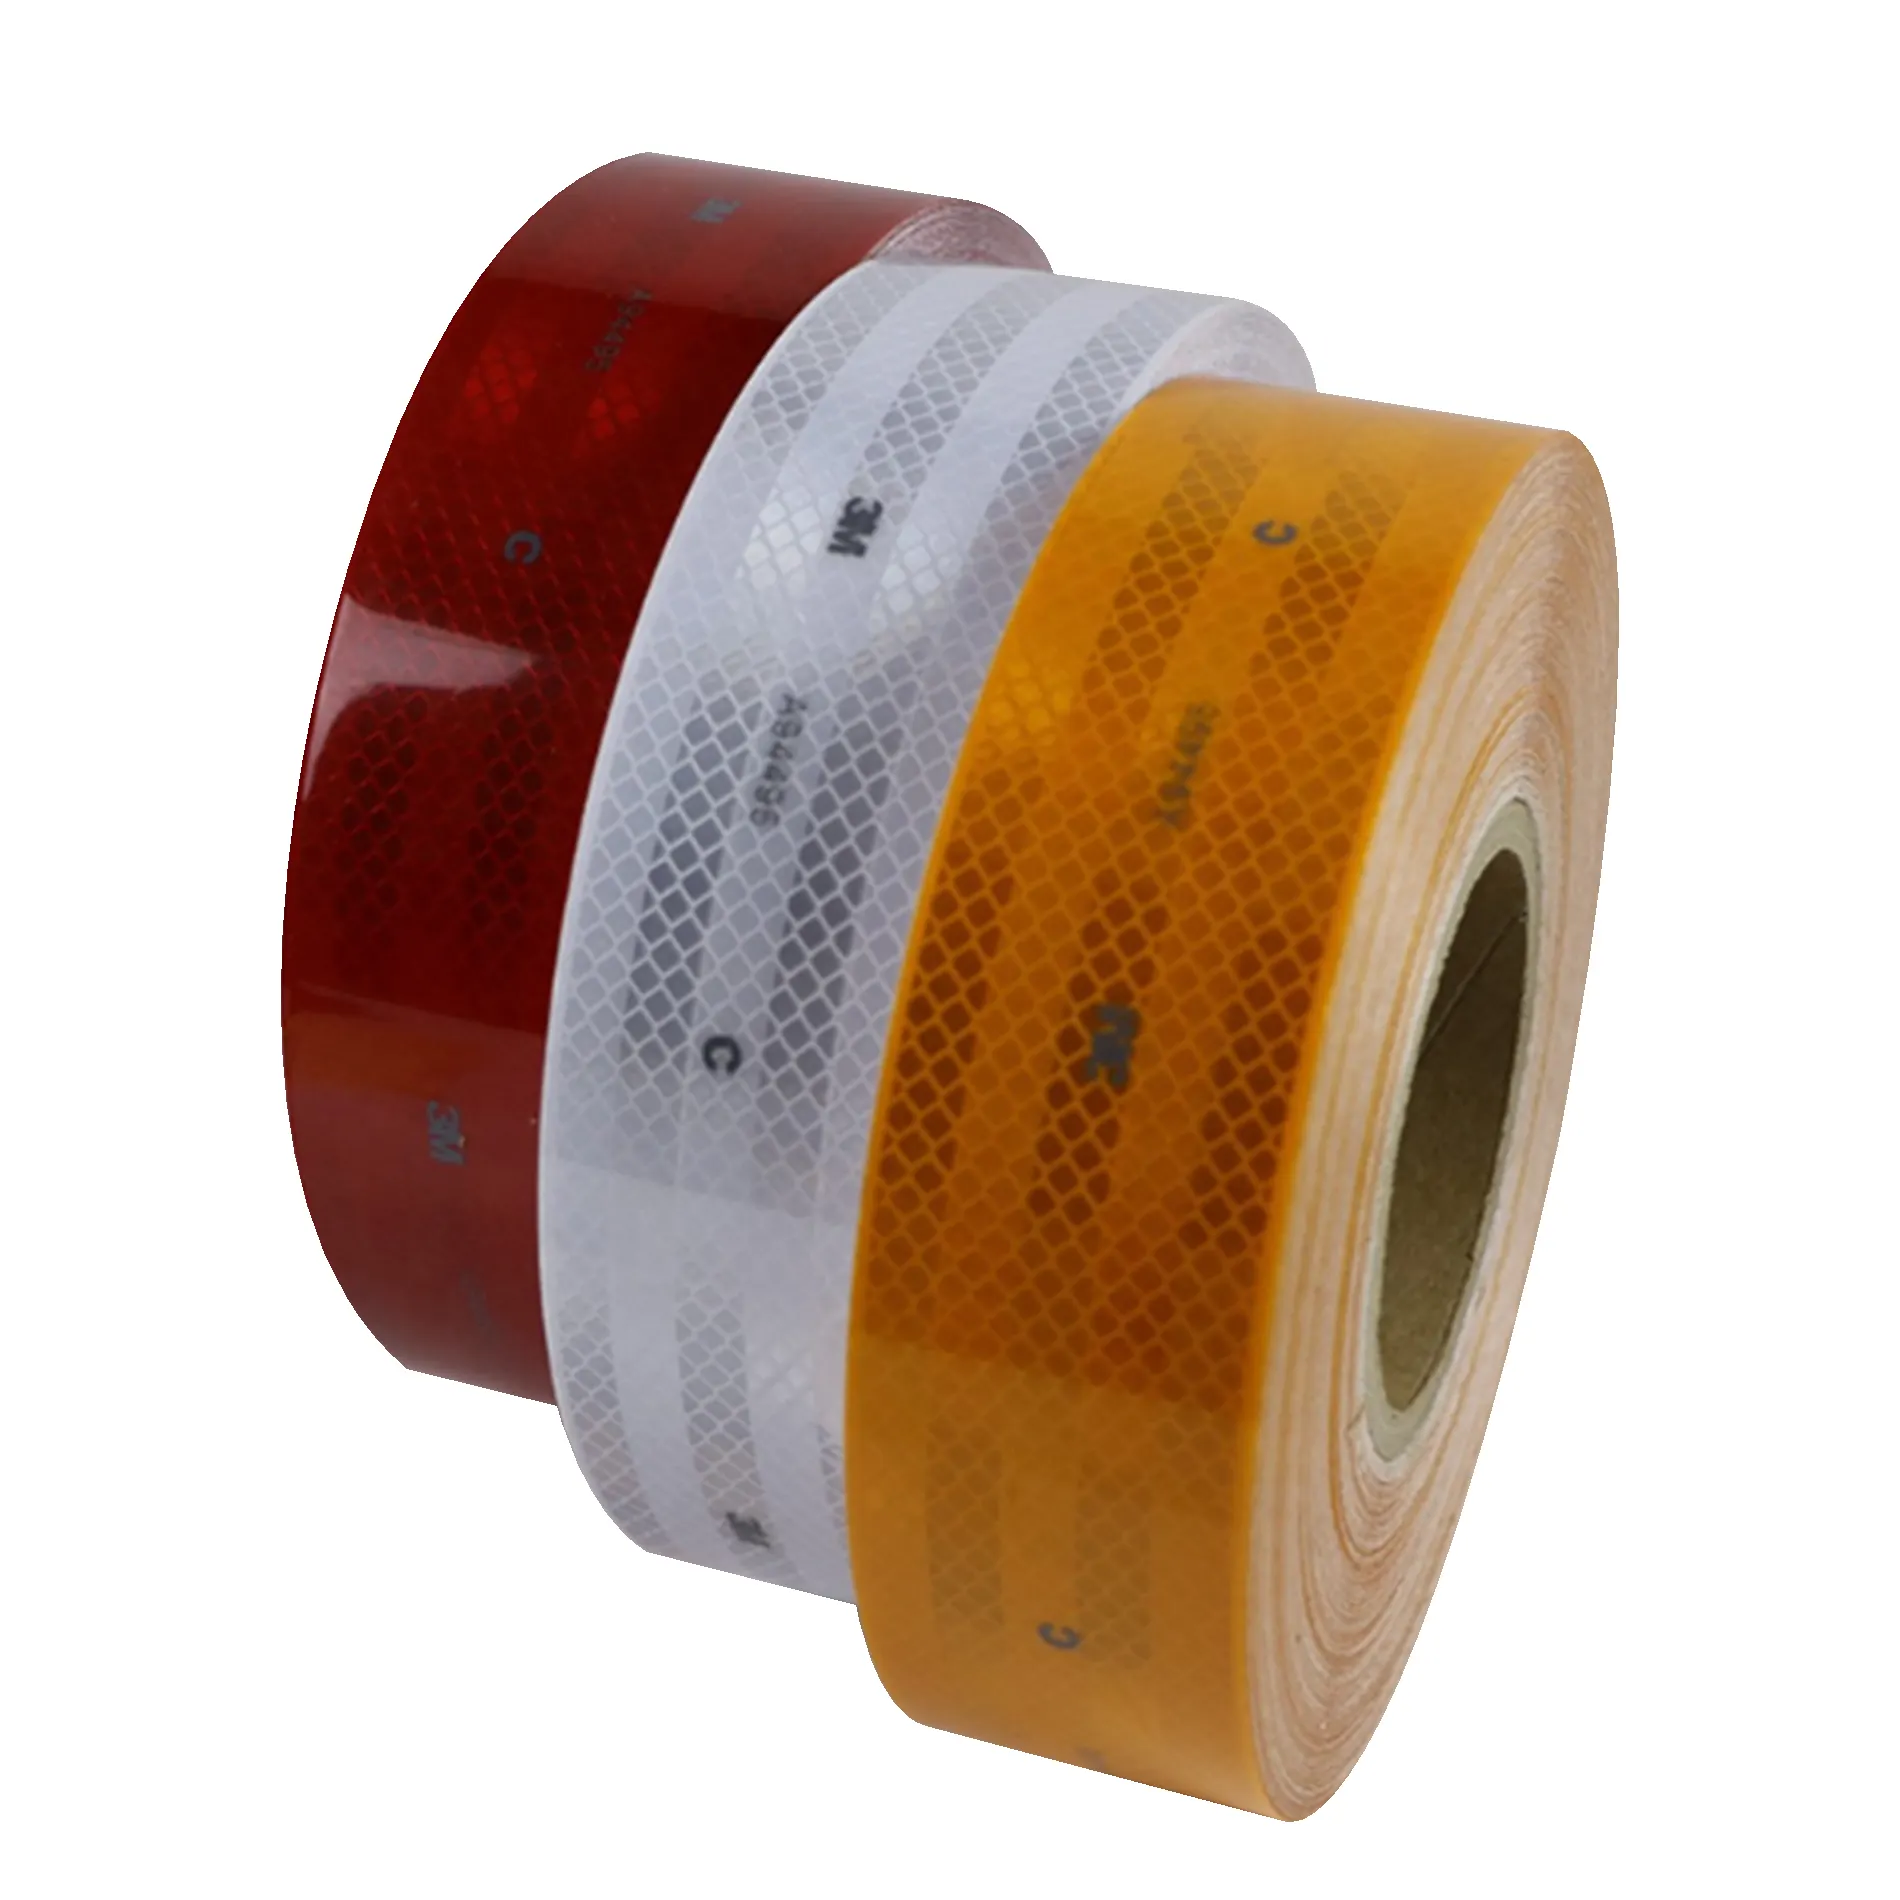 Reflective Self Adhesive India Market A94495 C Vehicle Conspicuity Reflective Truck Tape